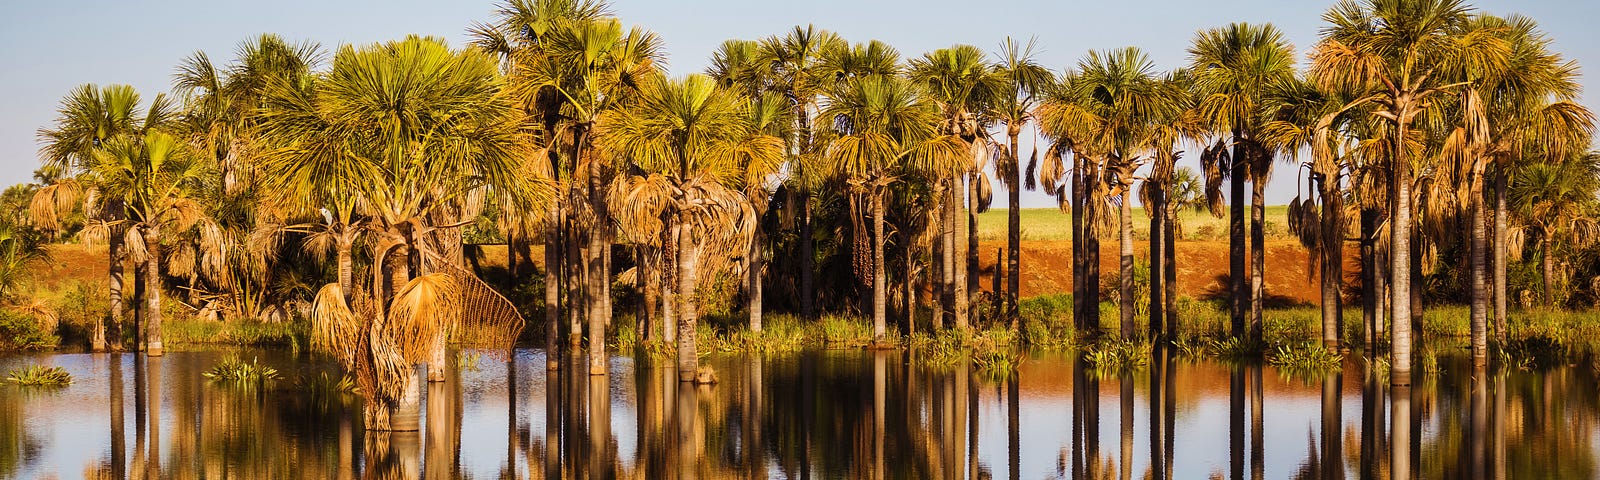 A row of huge palm trees with a blue sky and reflected in a body of water